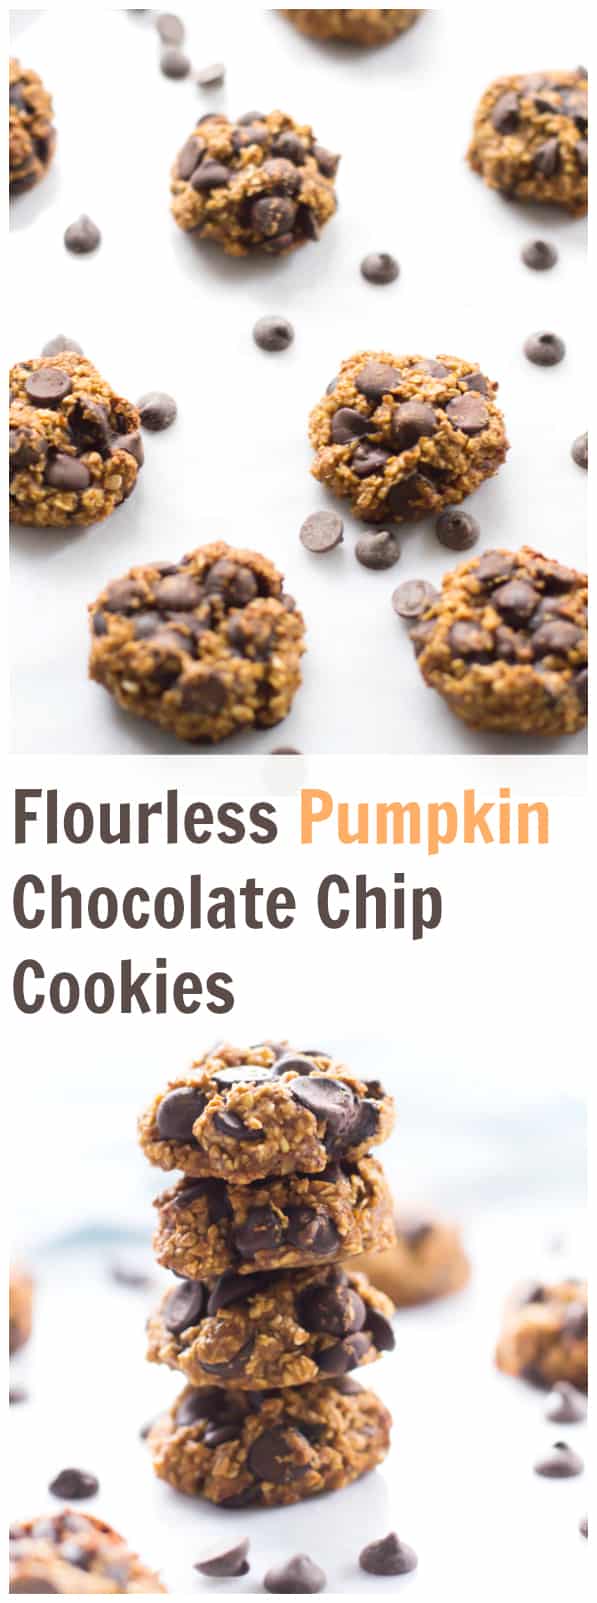 These flourless Pumpkin Chocolate Chip Cookies are healthier, gluten free, crisp on the outside, soft inside, delicious and super easy to make! This is my favourite cookies for fall. 